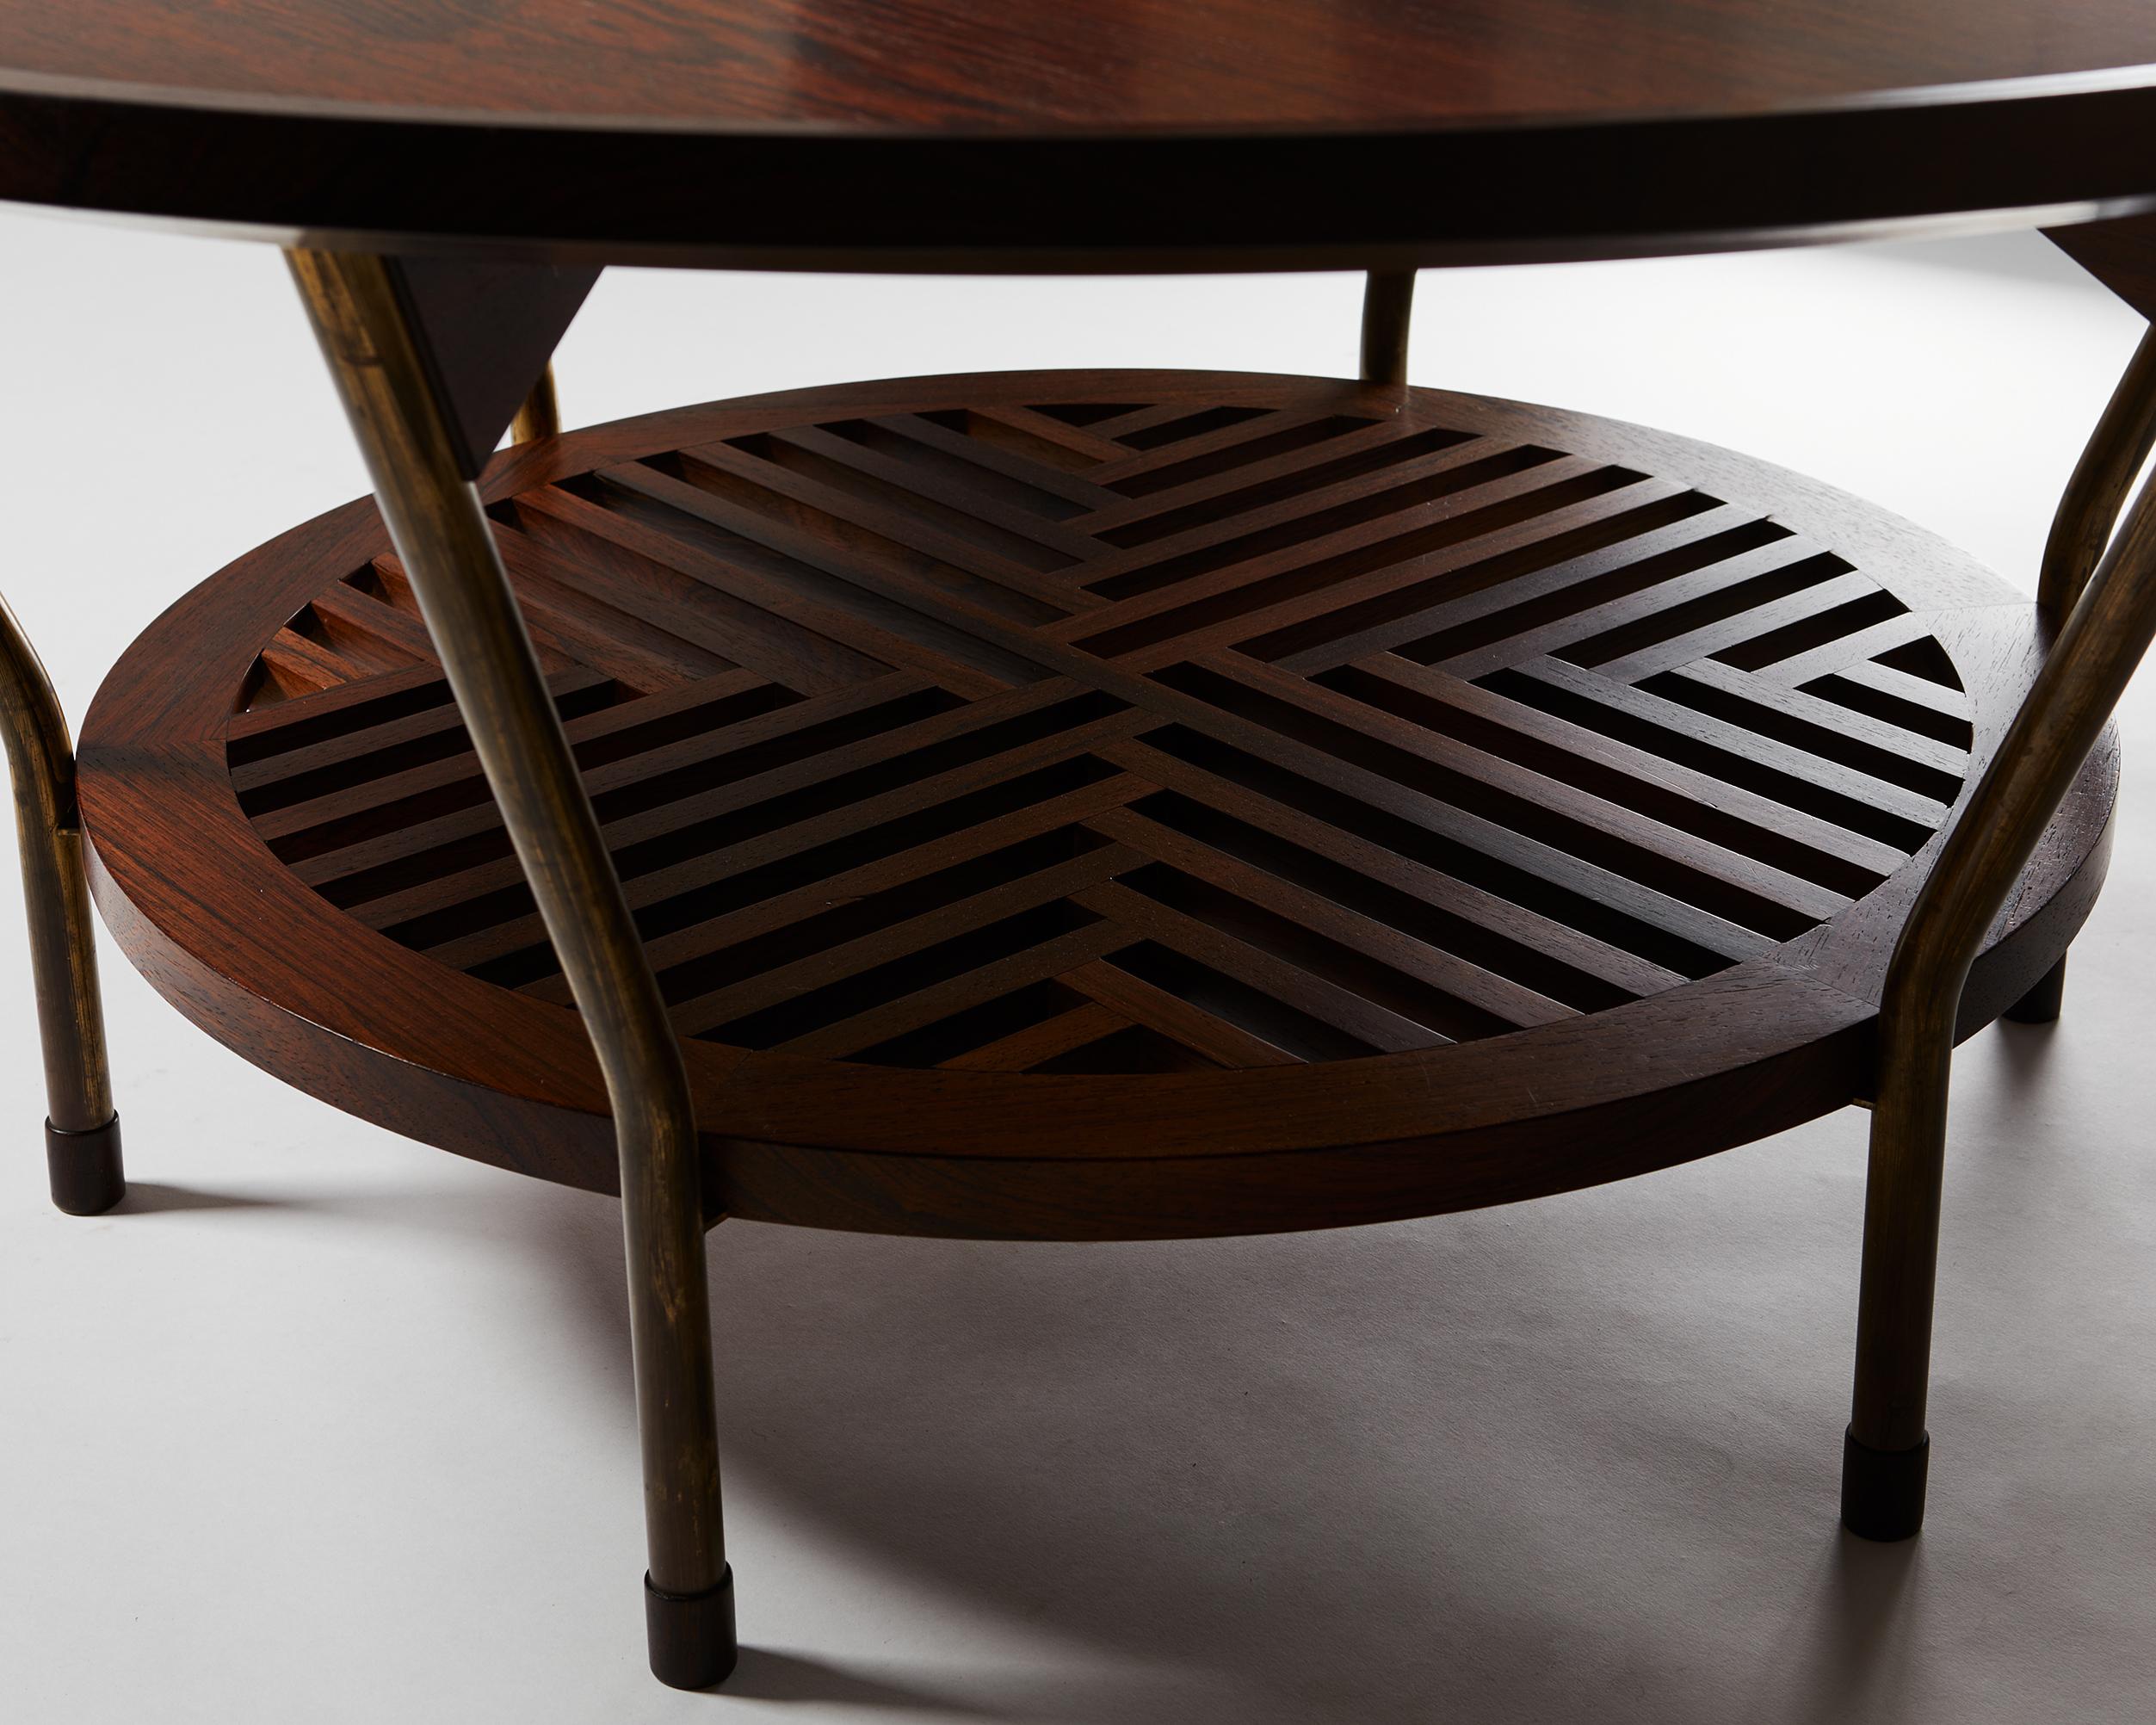 Occasional Table Designed by Frits Schlegel, Rosewood and Brass, Denmark, 1949 In Good Condition For Sale In Stockholm, SE